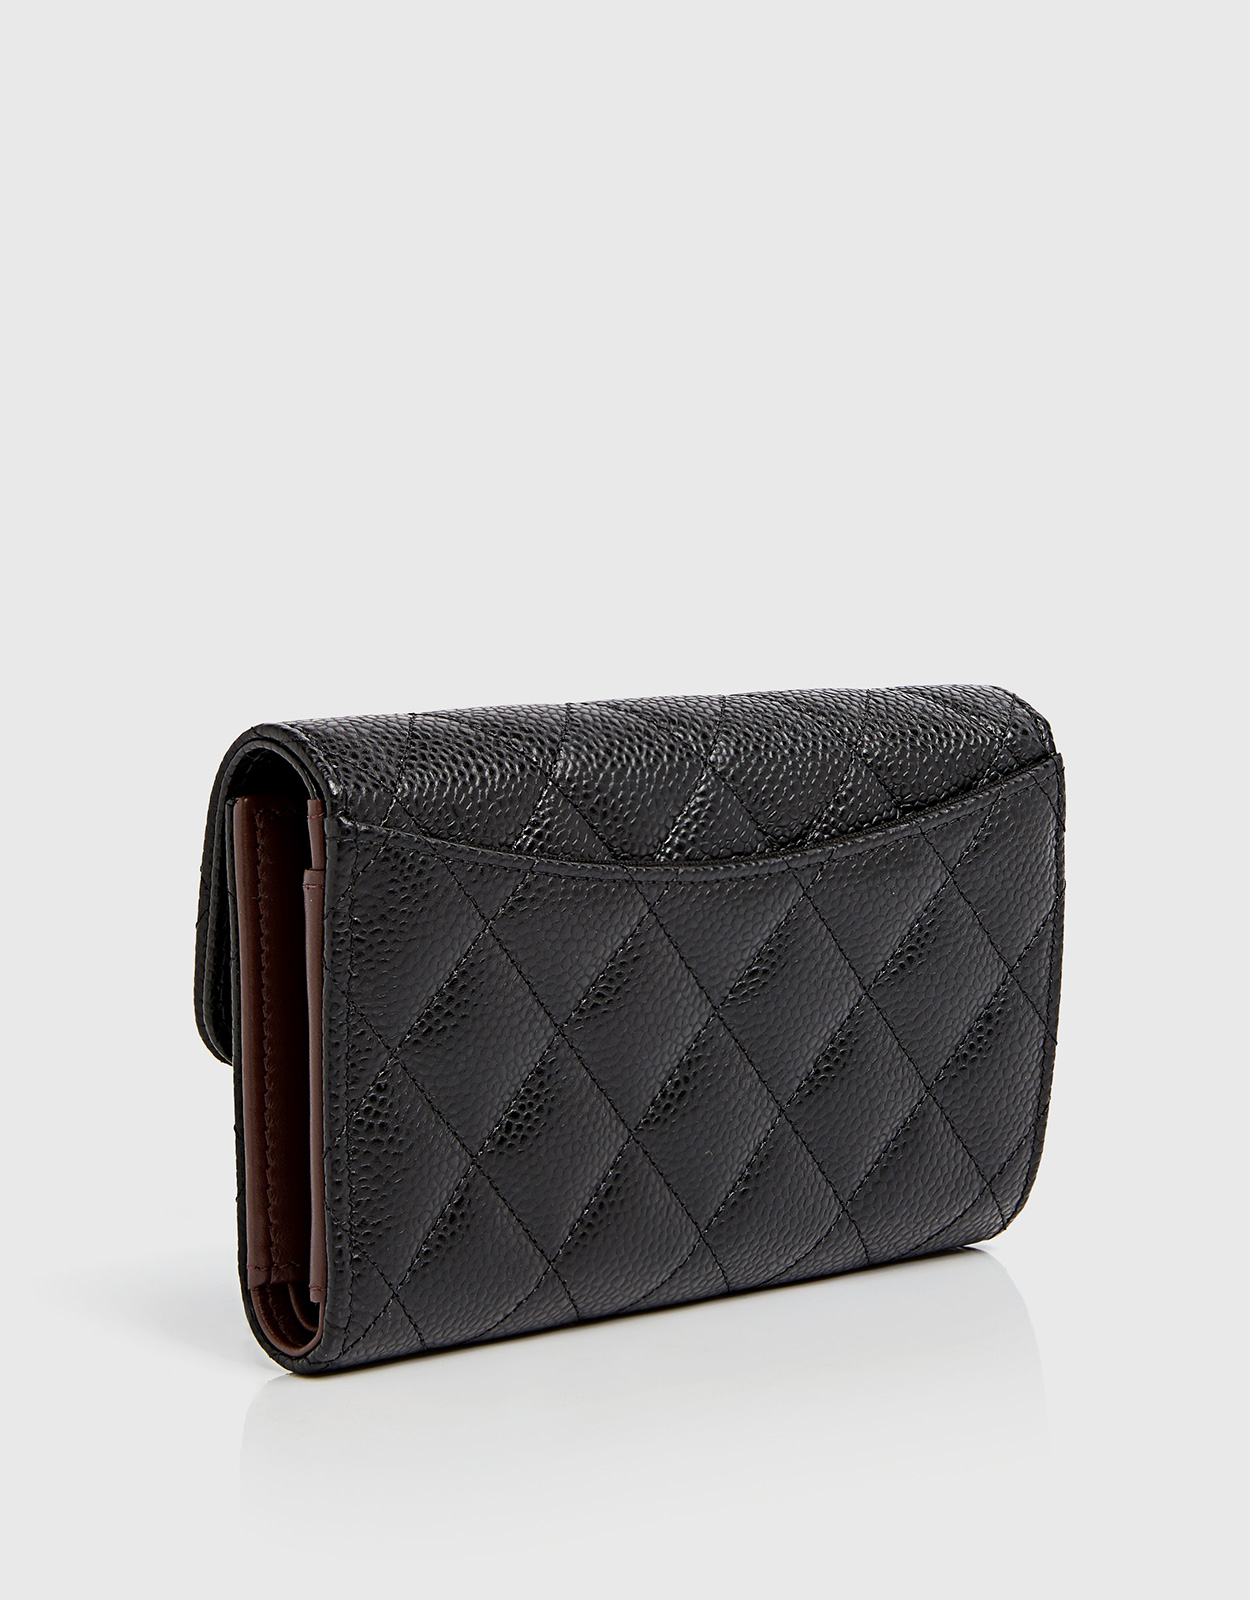 Chanel Classic Medium Flap Wallet In Grained Calfskin With Gold